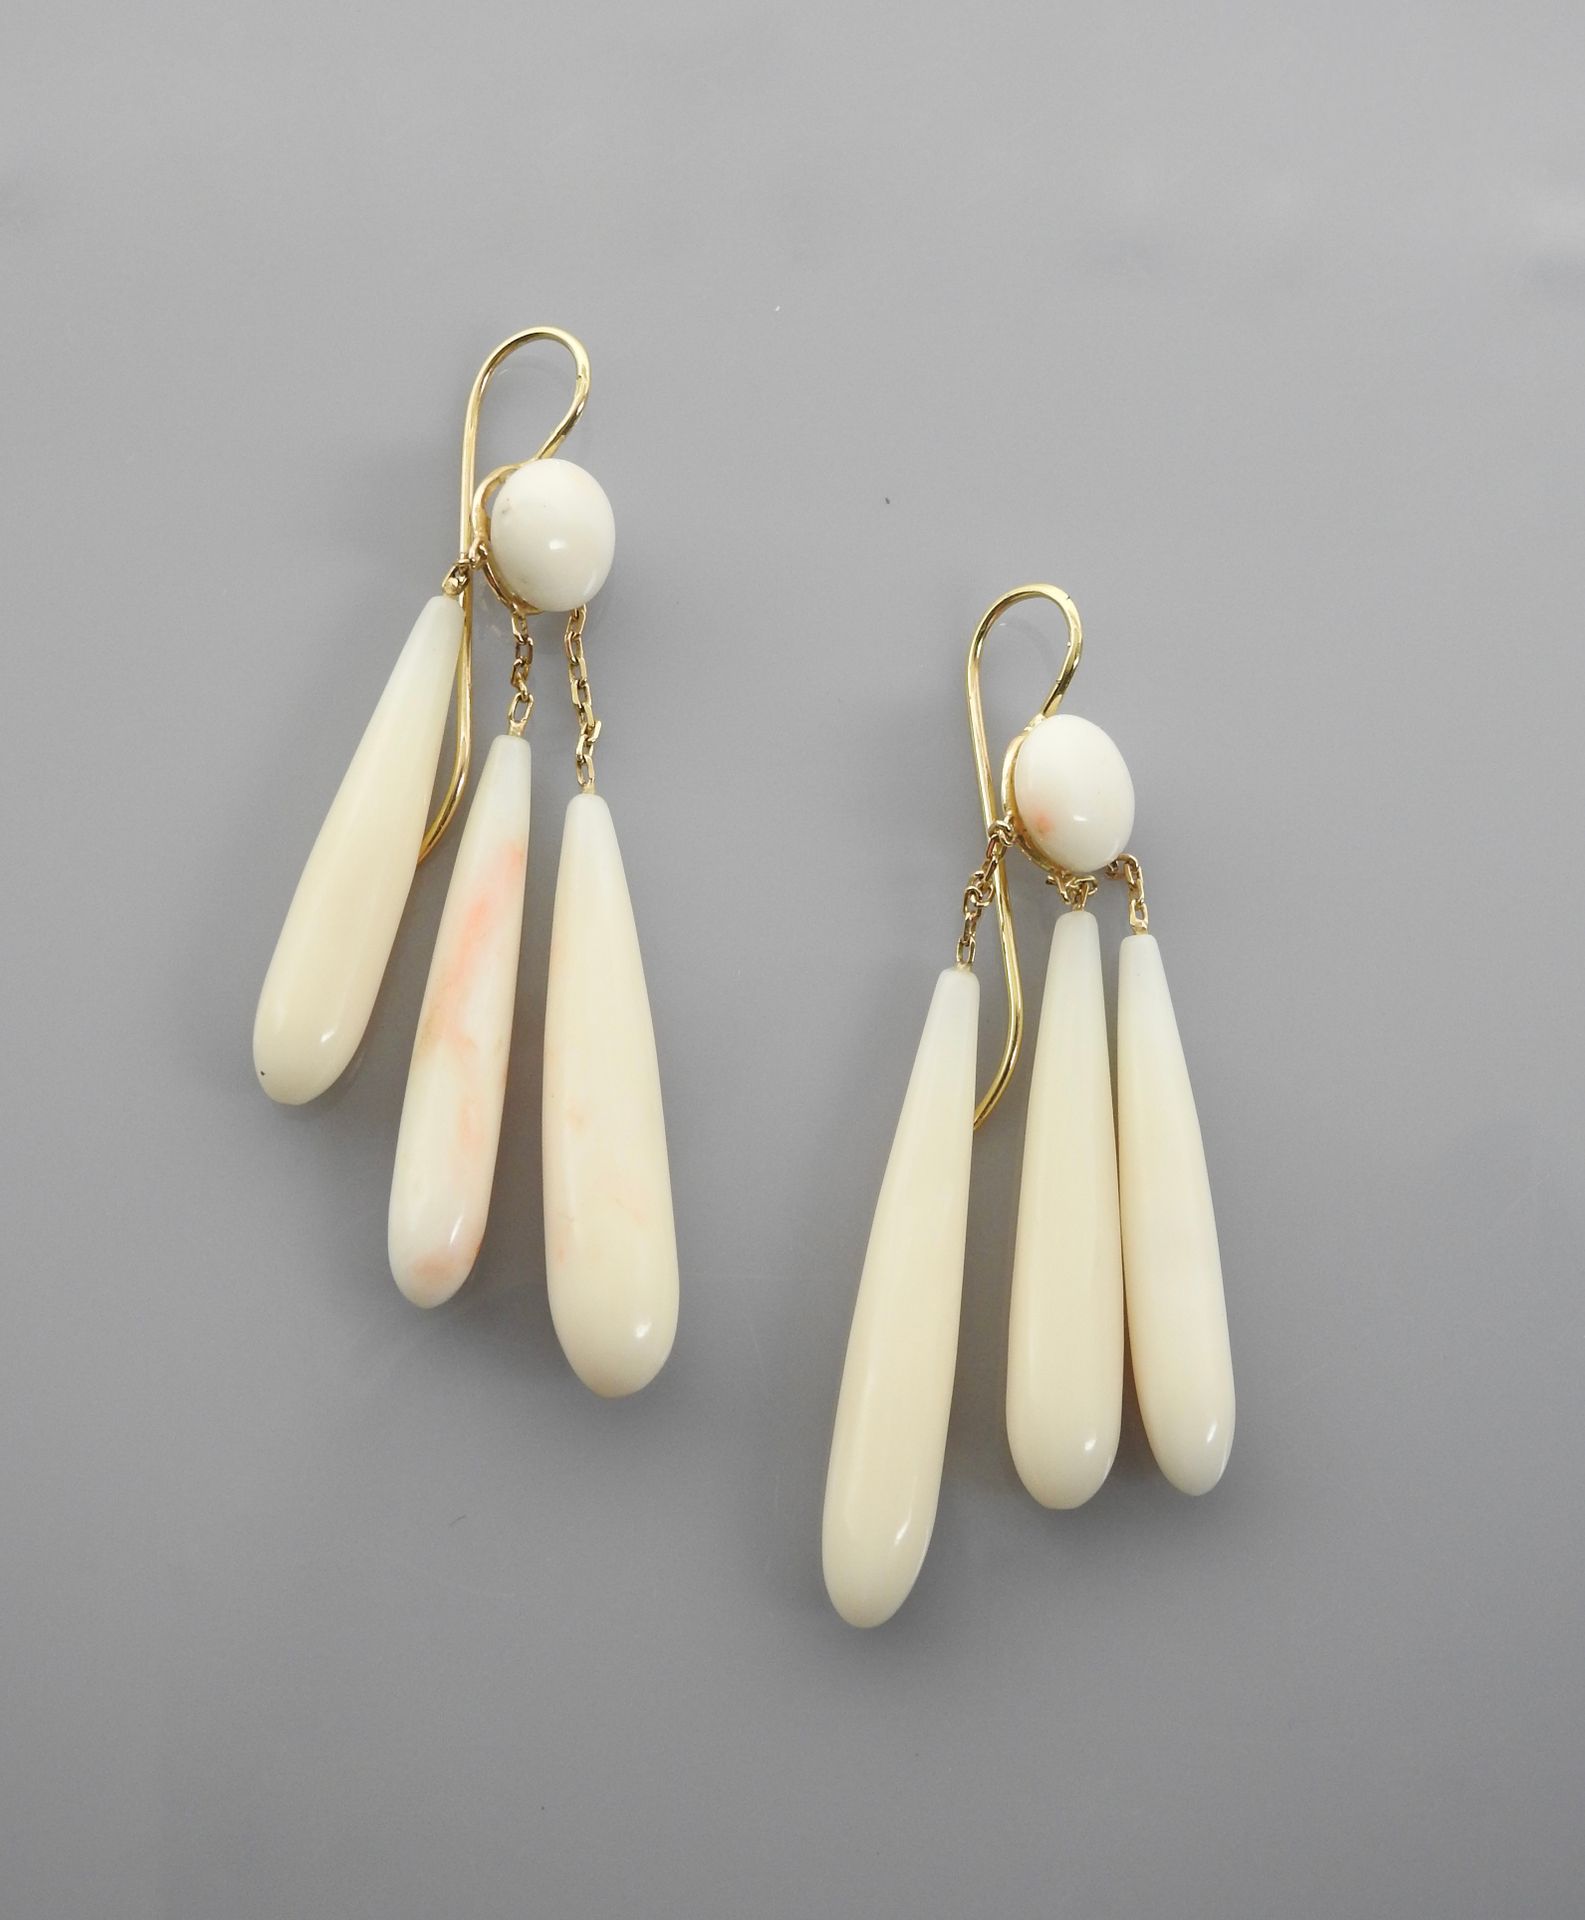 Null Yellow gold Poissardes earrings, 750 MM, each consisting of a round cabocho&hellip;